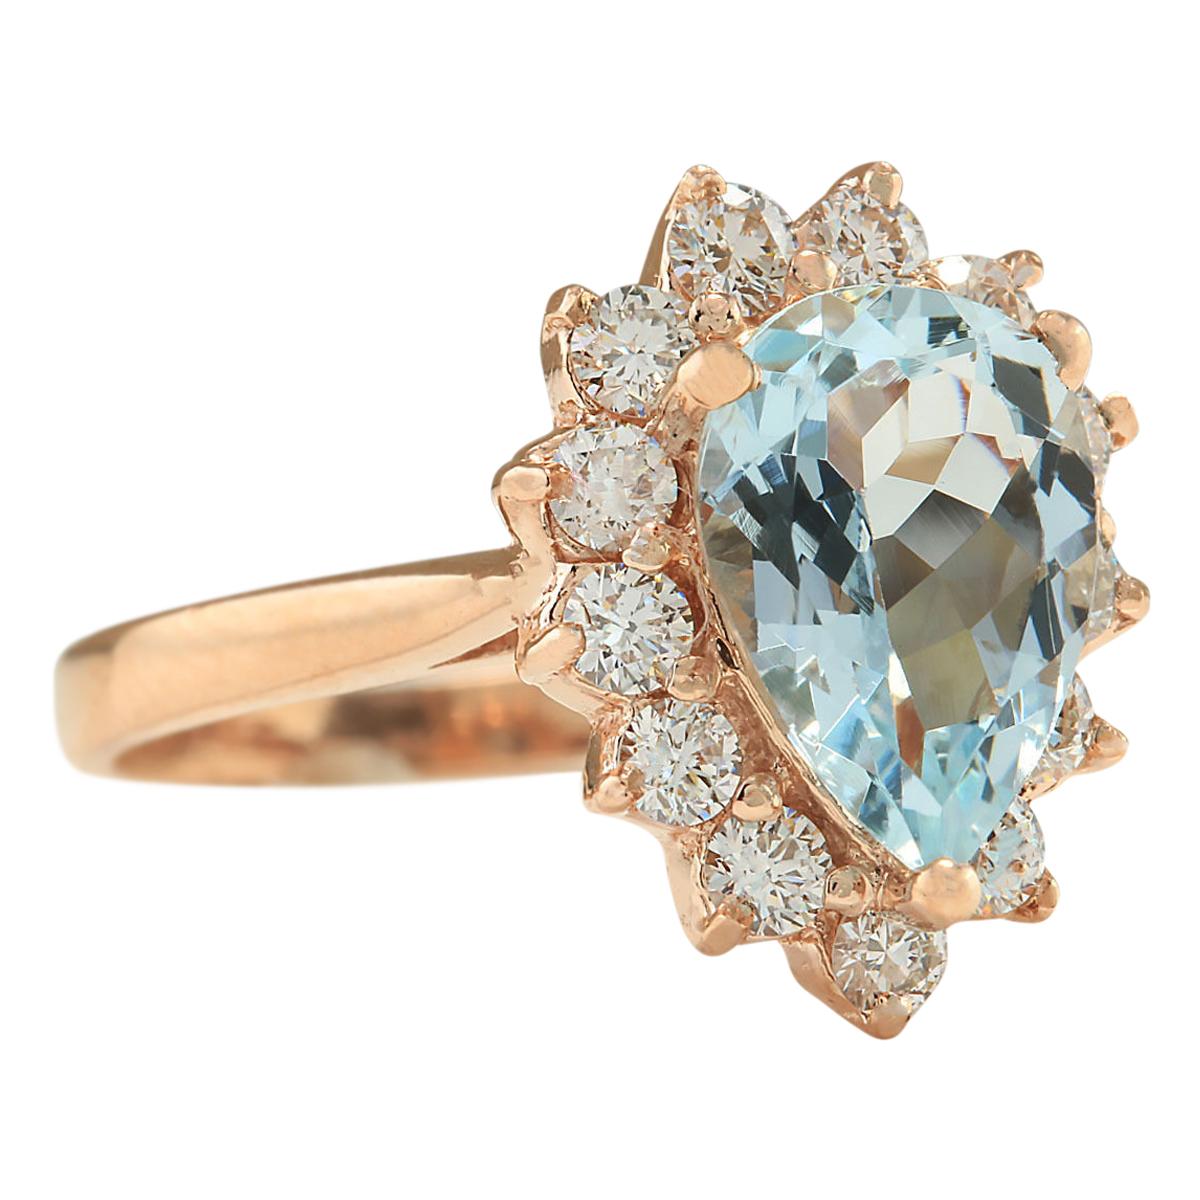 Stamped: 14K Rose Gold
Total Ring Weight: 4.0 Grams
Total Natural Aquamarine Weight is 1.56 Carat (Measures: 10.00x7.00 mm)
Color: Blue
Total Natural Diamond Weight is 0.75 Carat
Color: F-G, Clarity: VS2-SI1
Face Measures: 15.25x11.80 mm
Sku: